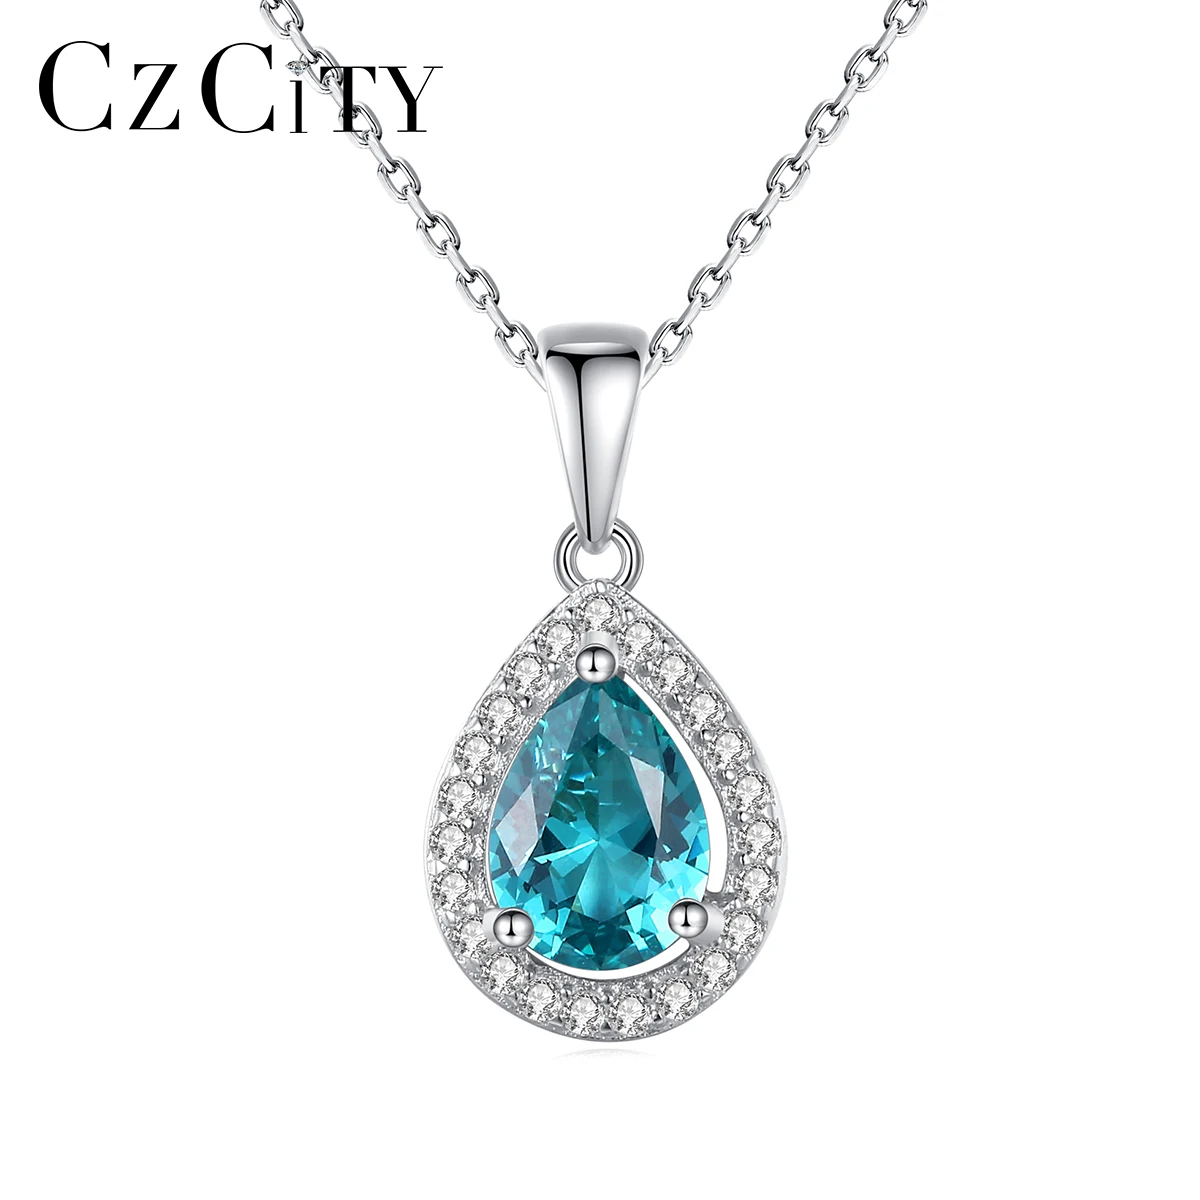 

CZ Pave Bold Pear-Shaped Teardrop Pendant S925 Sterling Silver Link Chain Emerald Gemstone Necklace